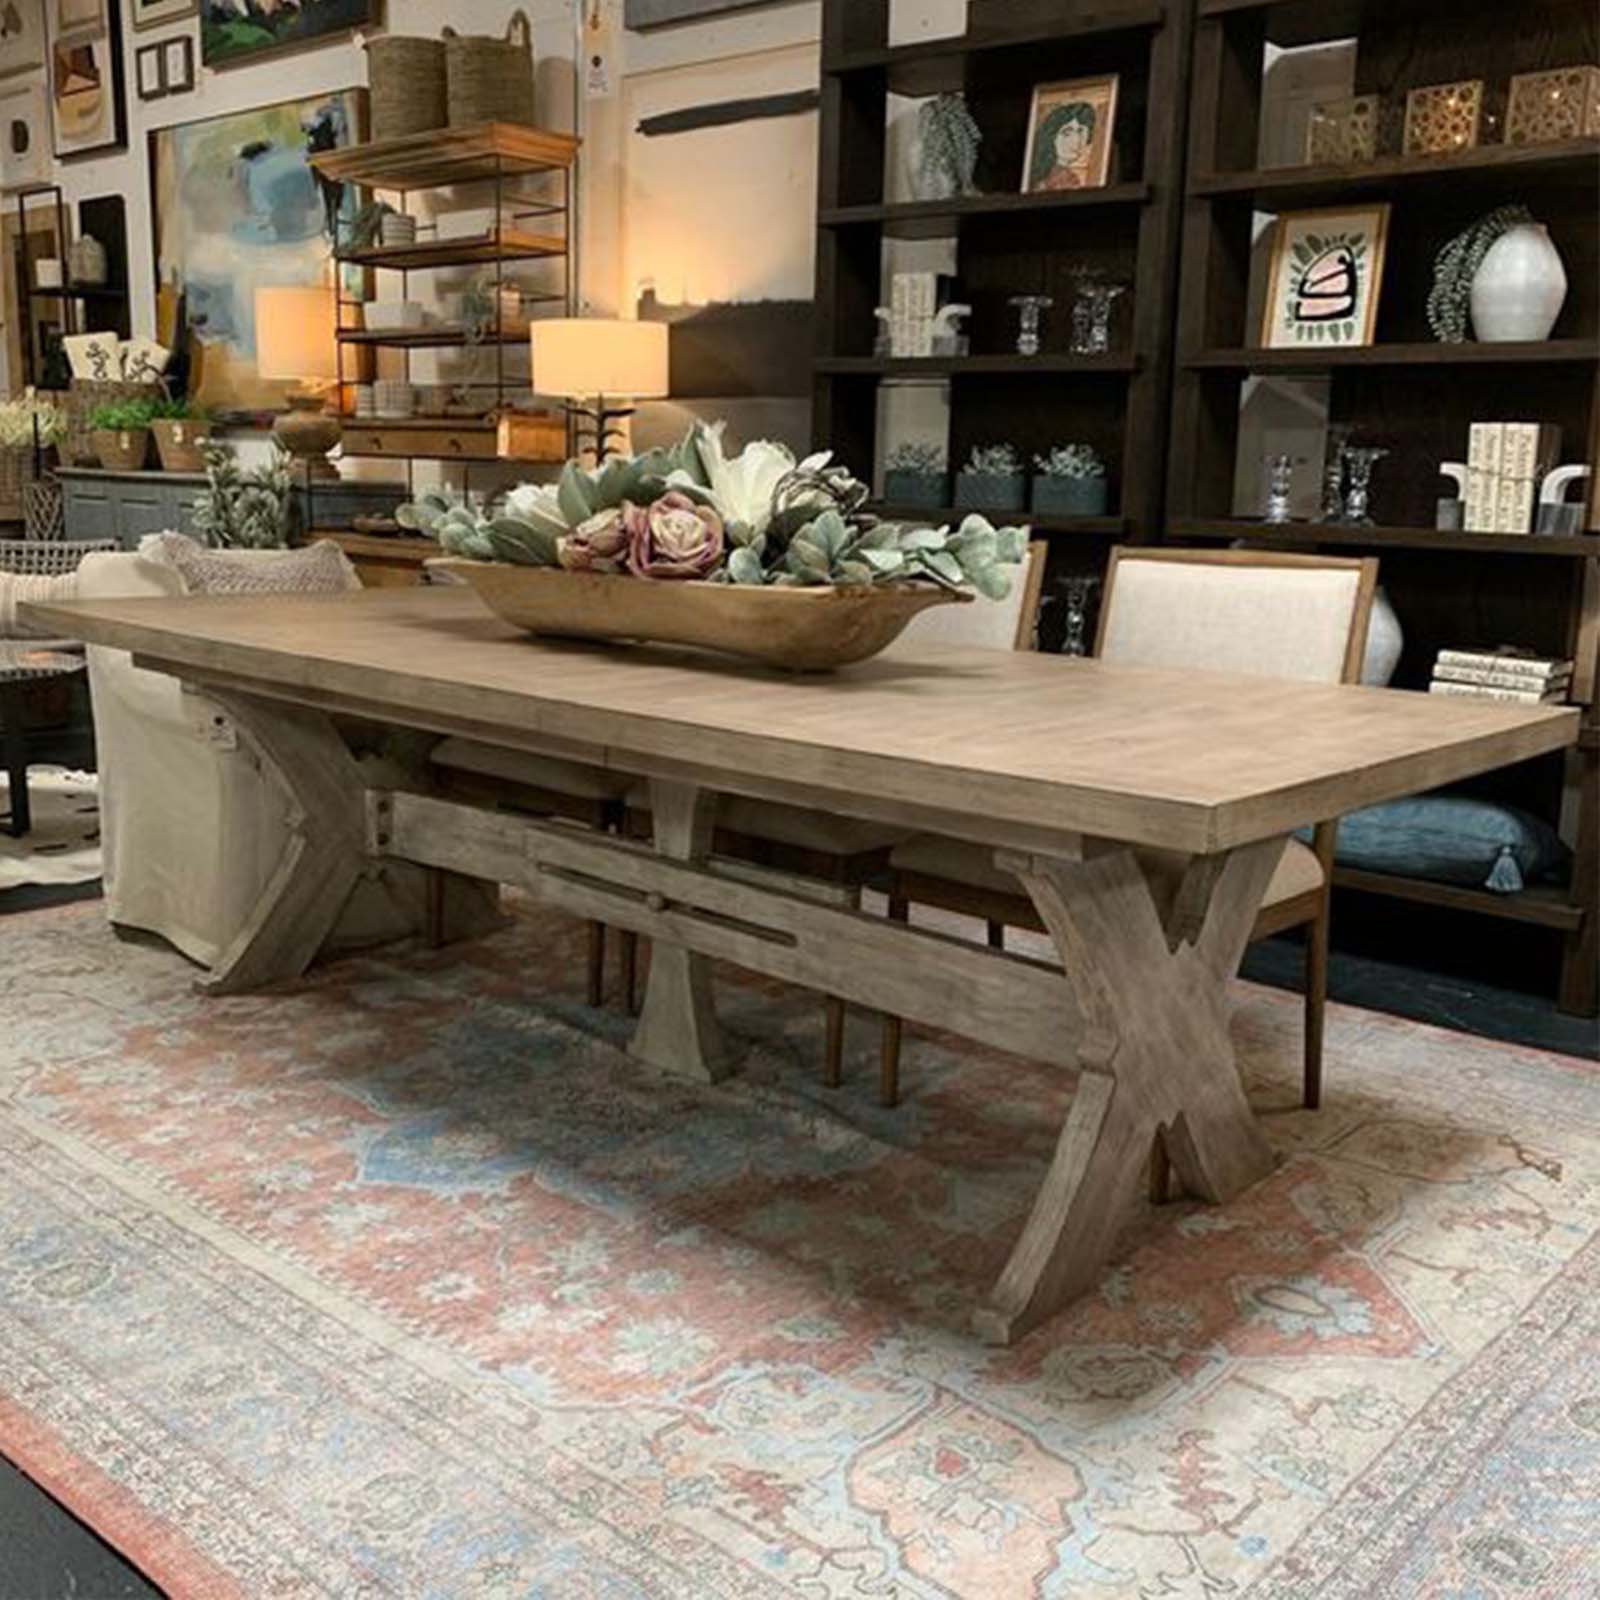 Hathaway 80" Dining Table